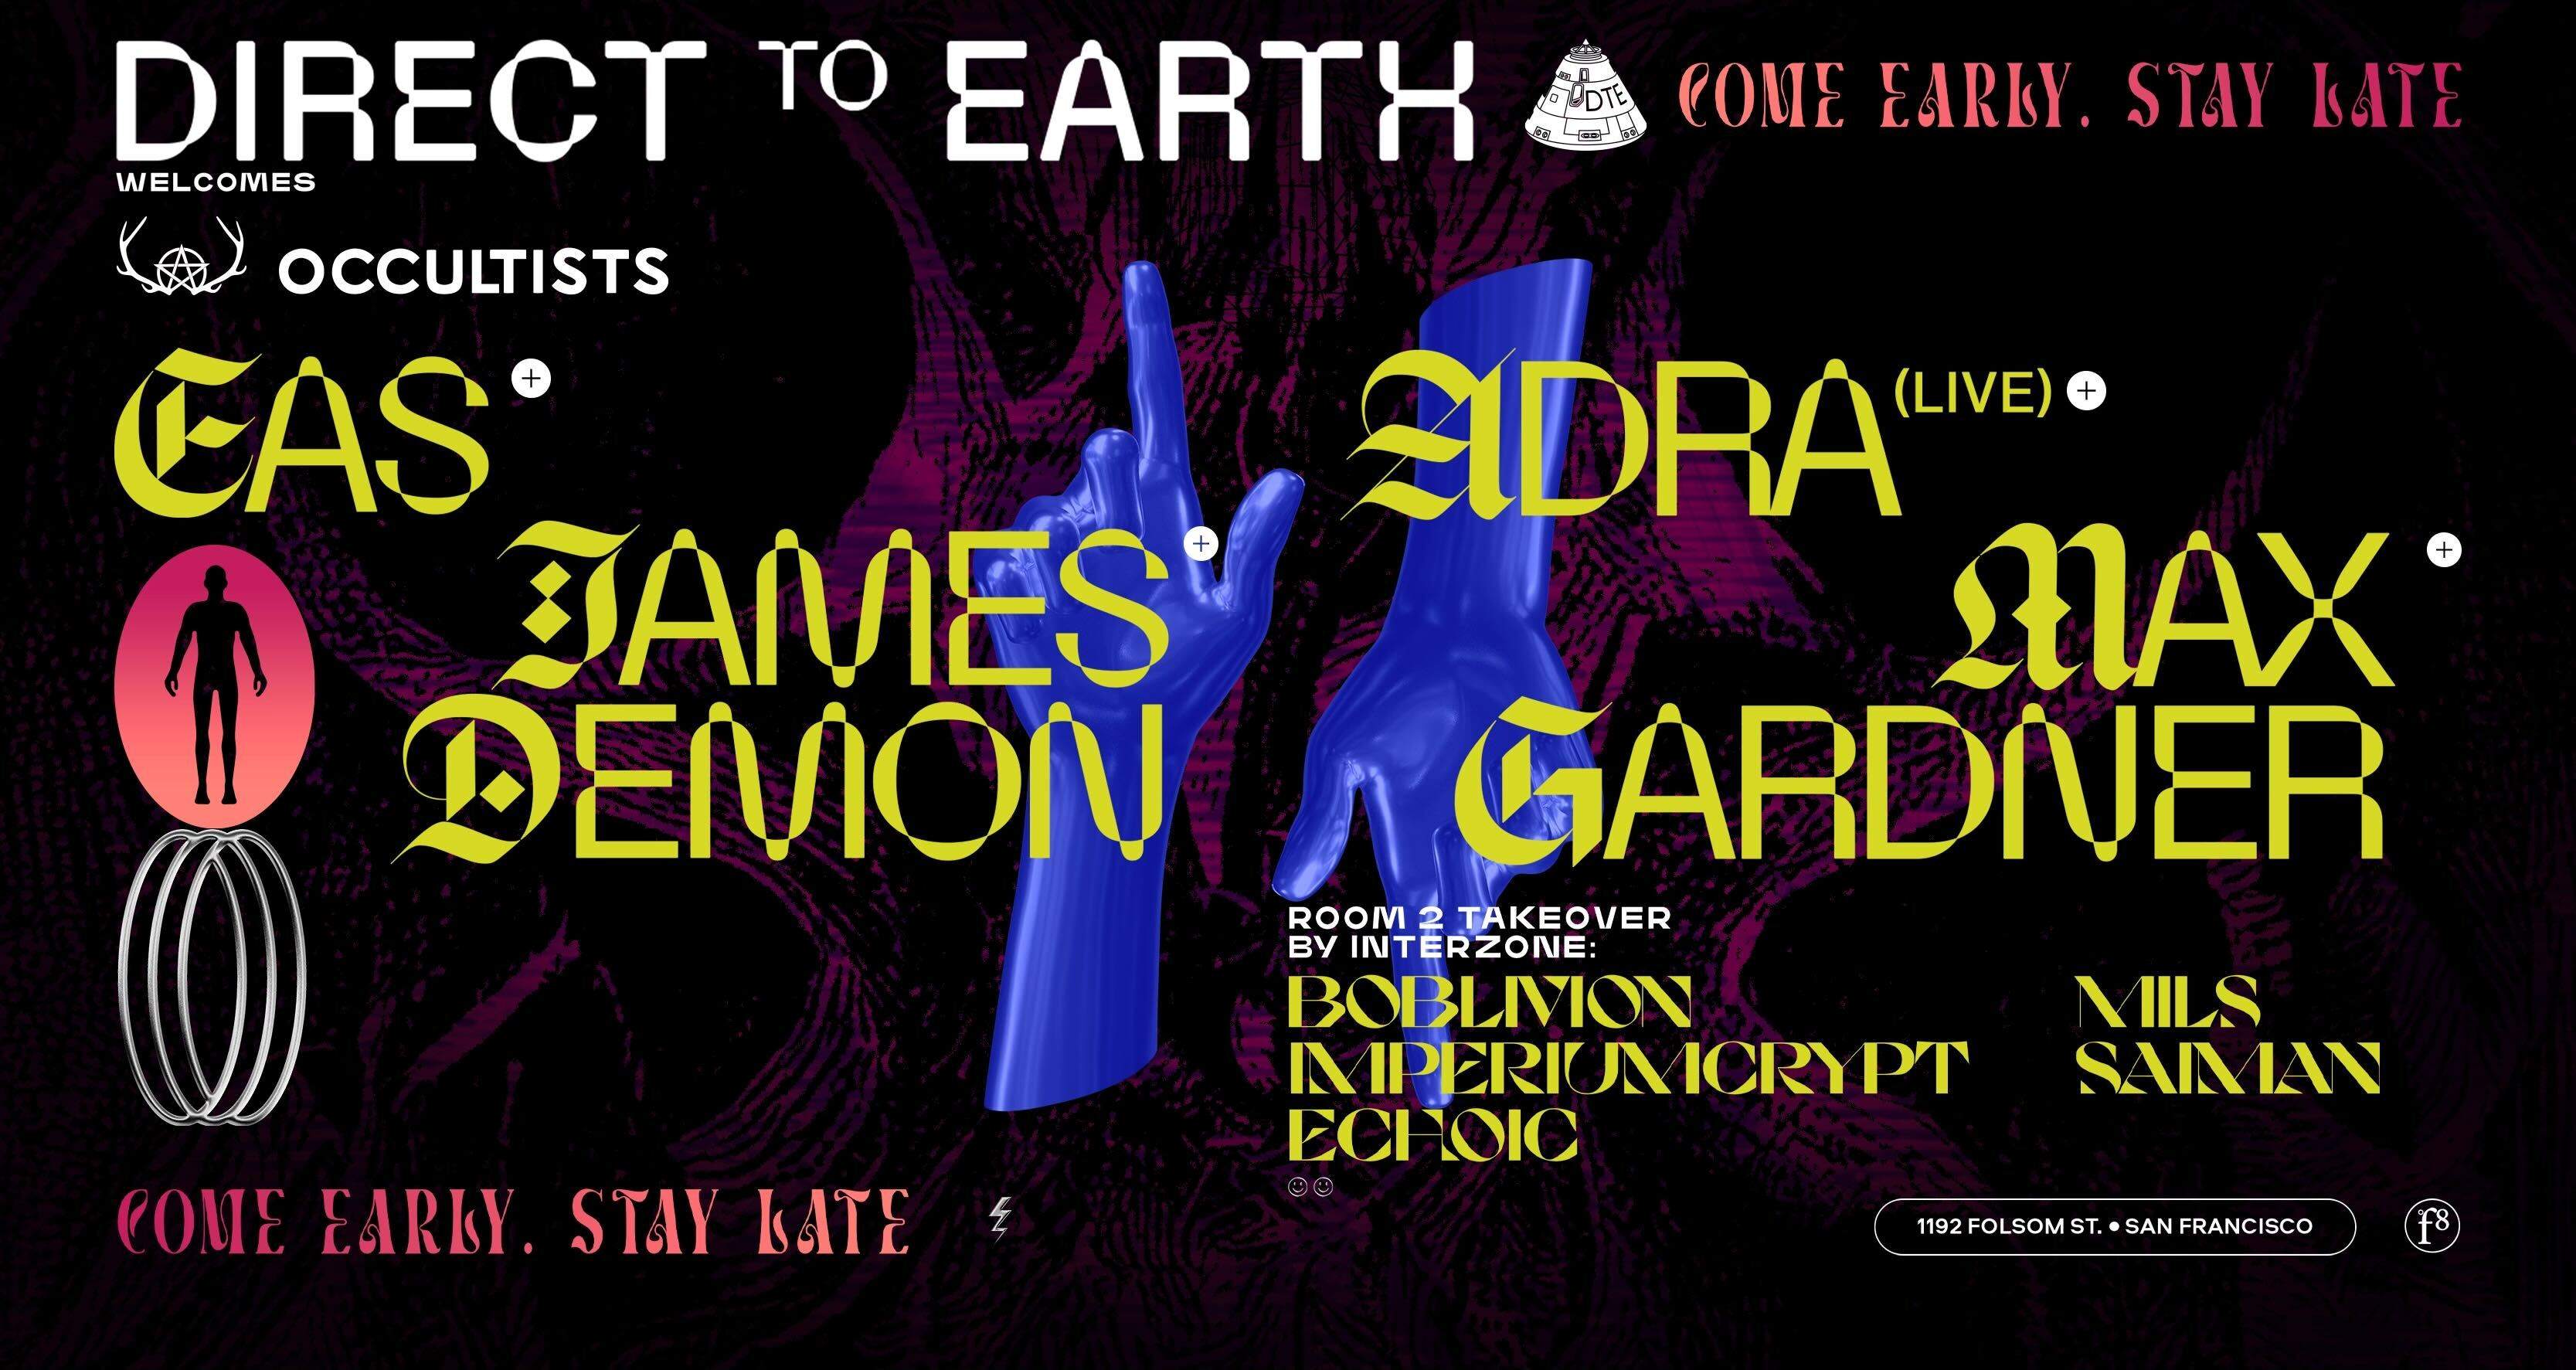 Direct to Earth welcome Occultists with EAS, James Demon, Interzone, Adra (live) & Max Gardner - Página trasera